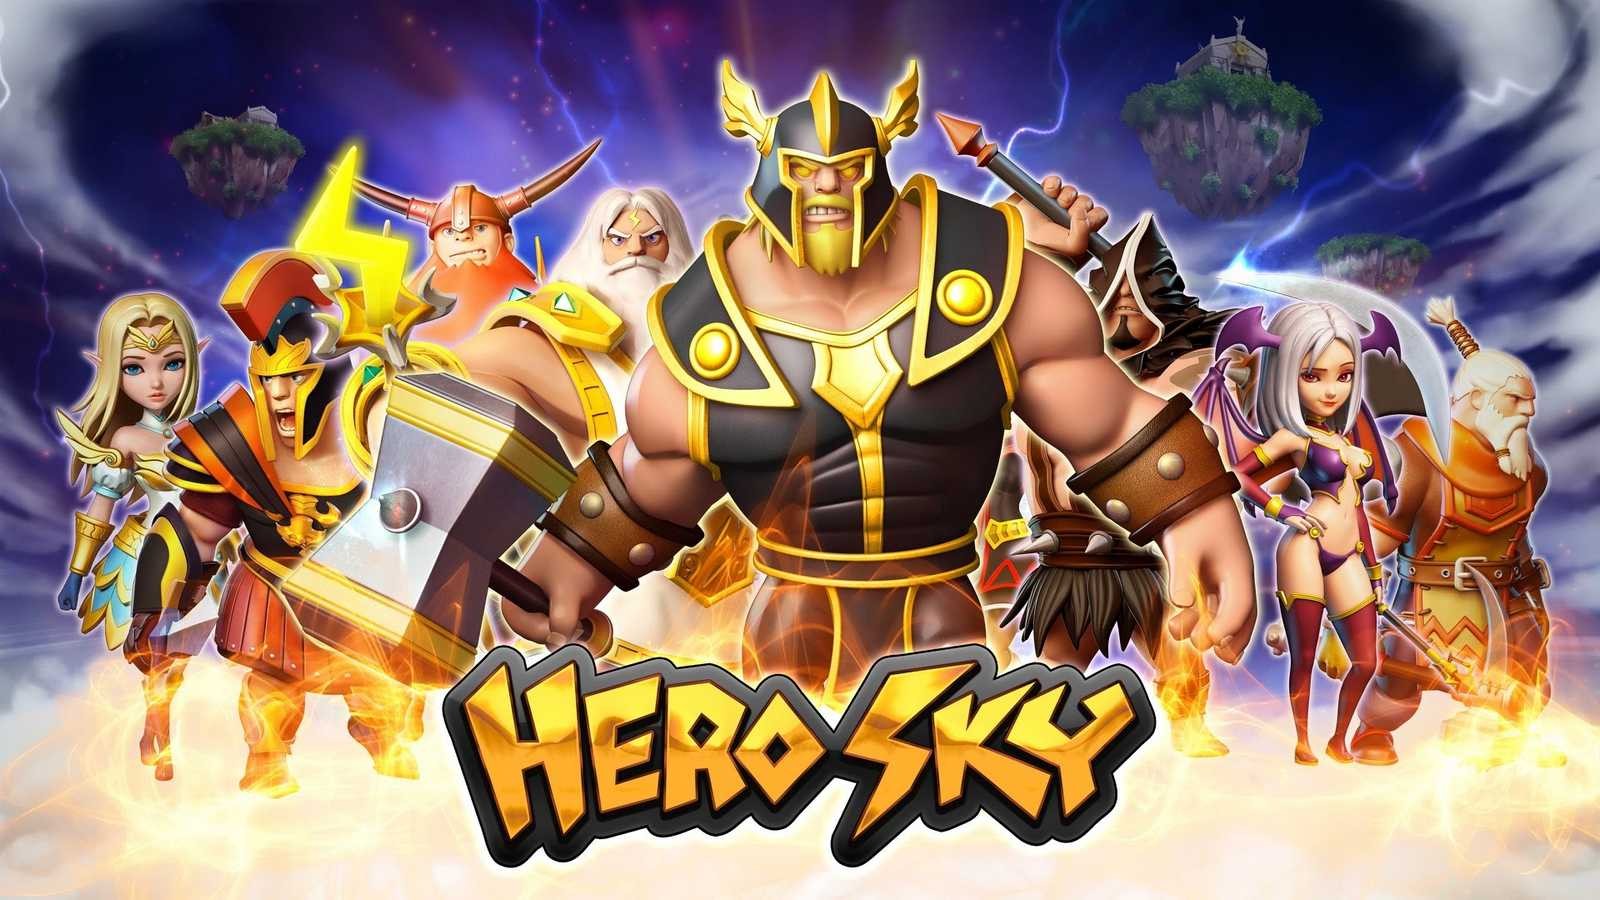 strategy-rpg-hero-sky-epic-guild-wars-is-out-now-on-ios-and-android